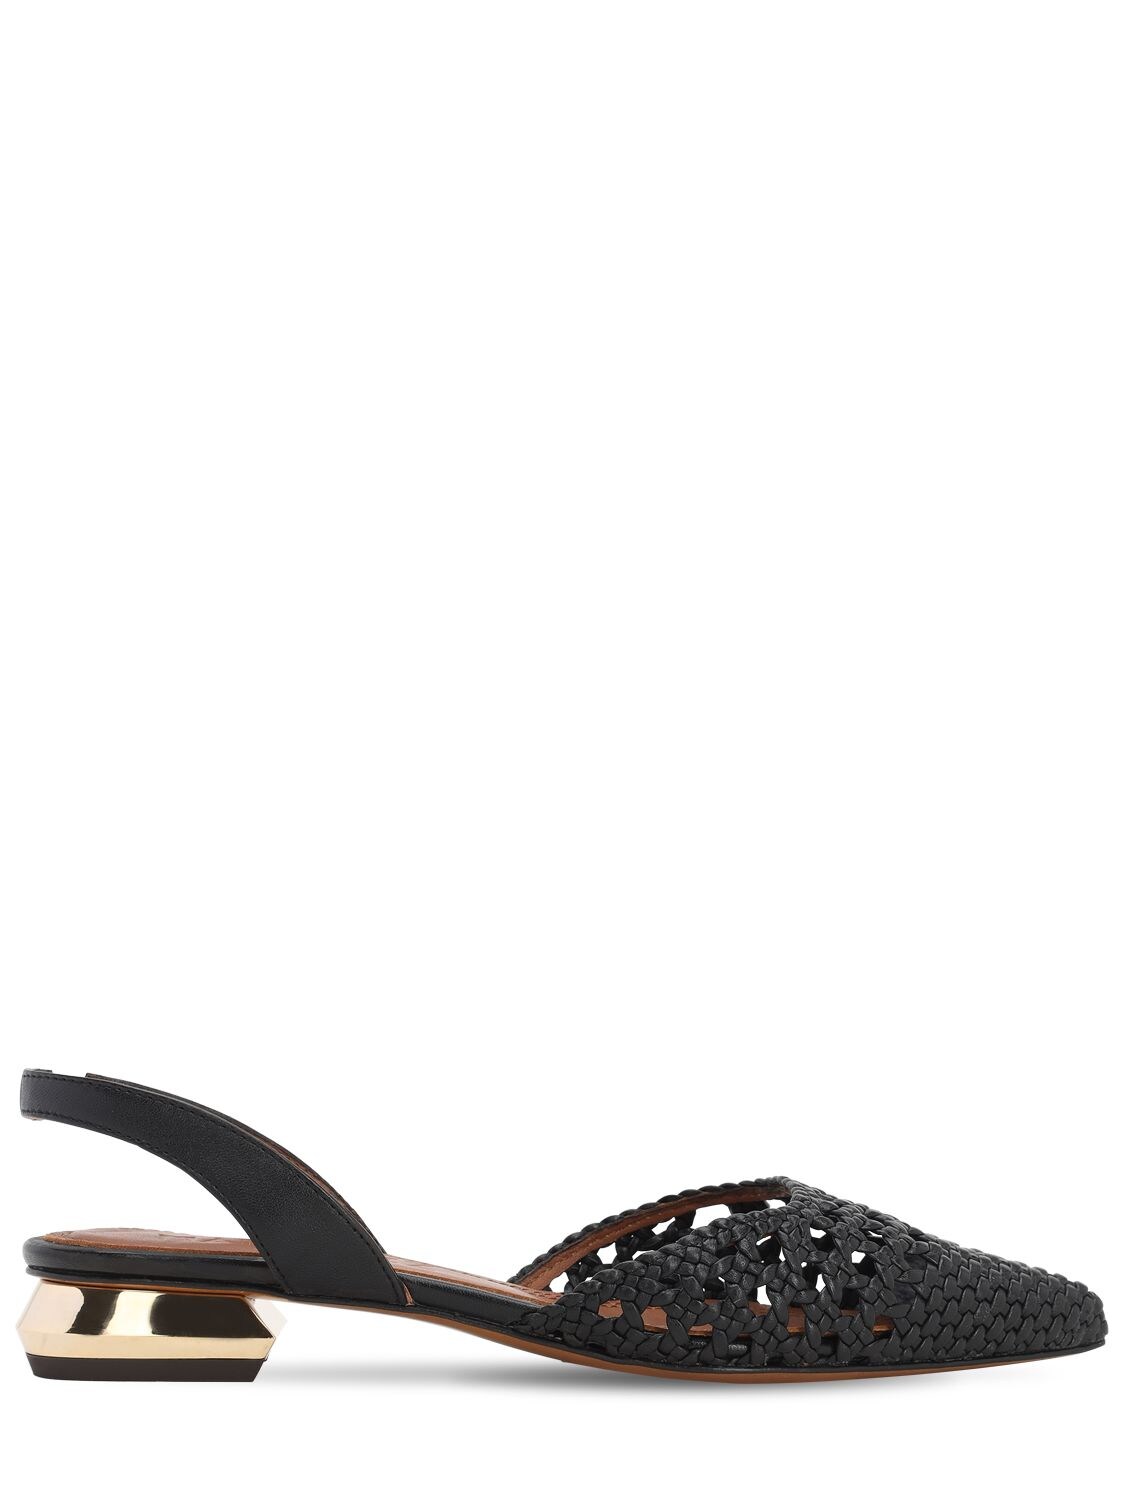 Souliers Martinez 30mm Woven Leather Sling Back Flats In Black